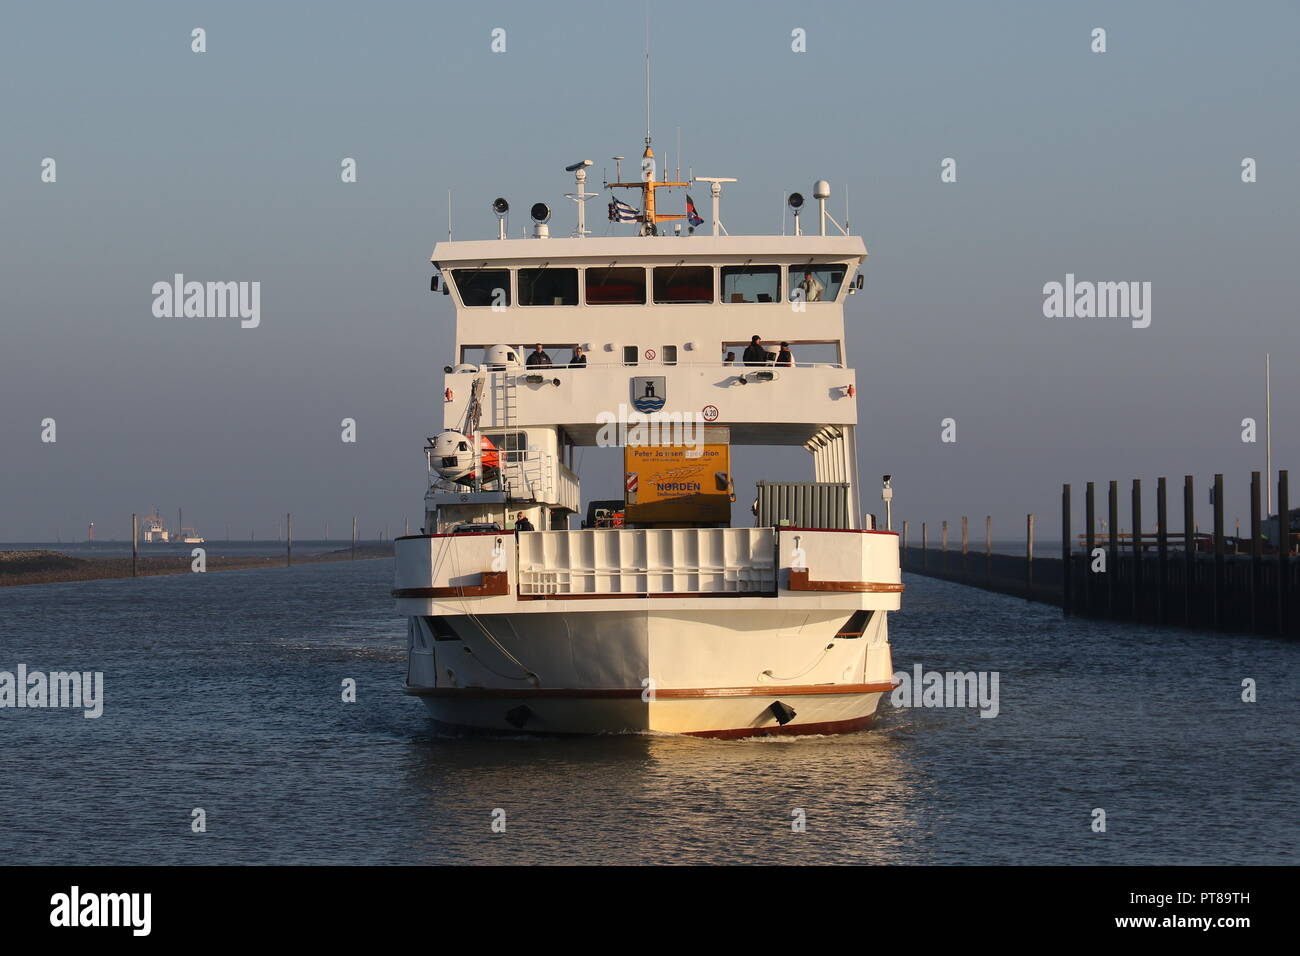 The car ferry Frisia I reached on September 27, 2018 the port of Norddeich. Stock Photo